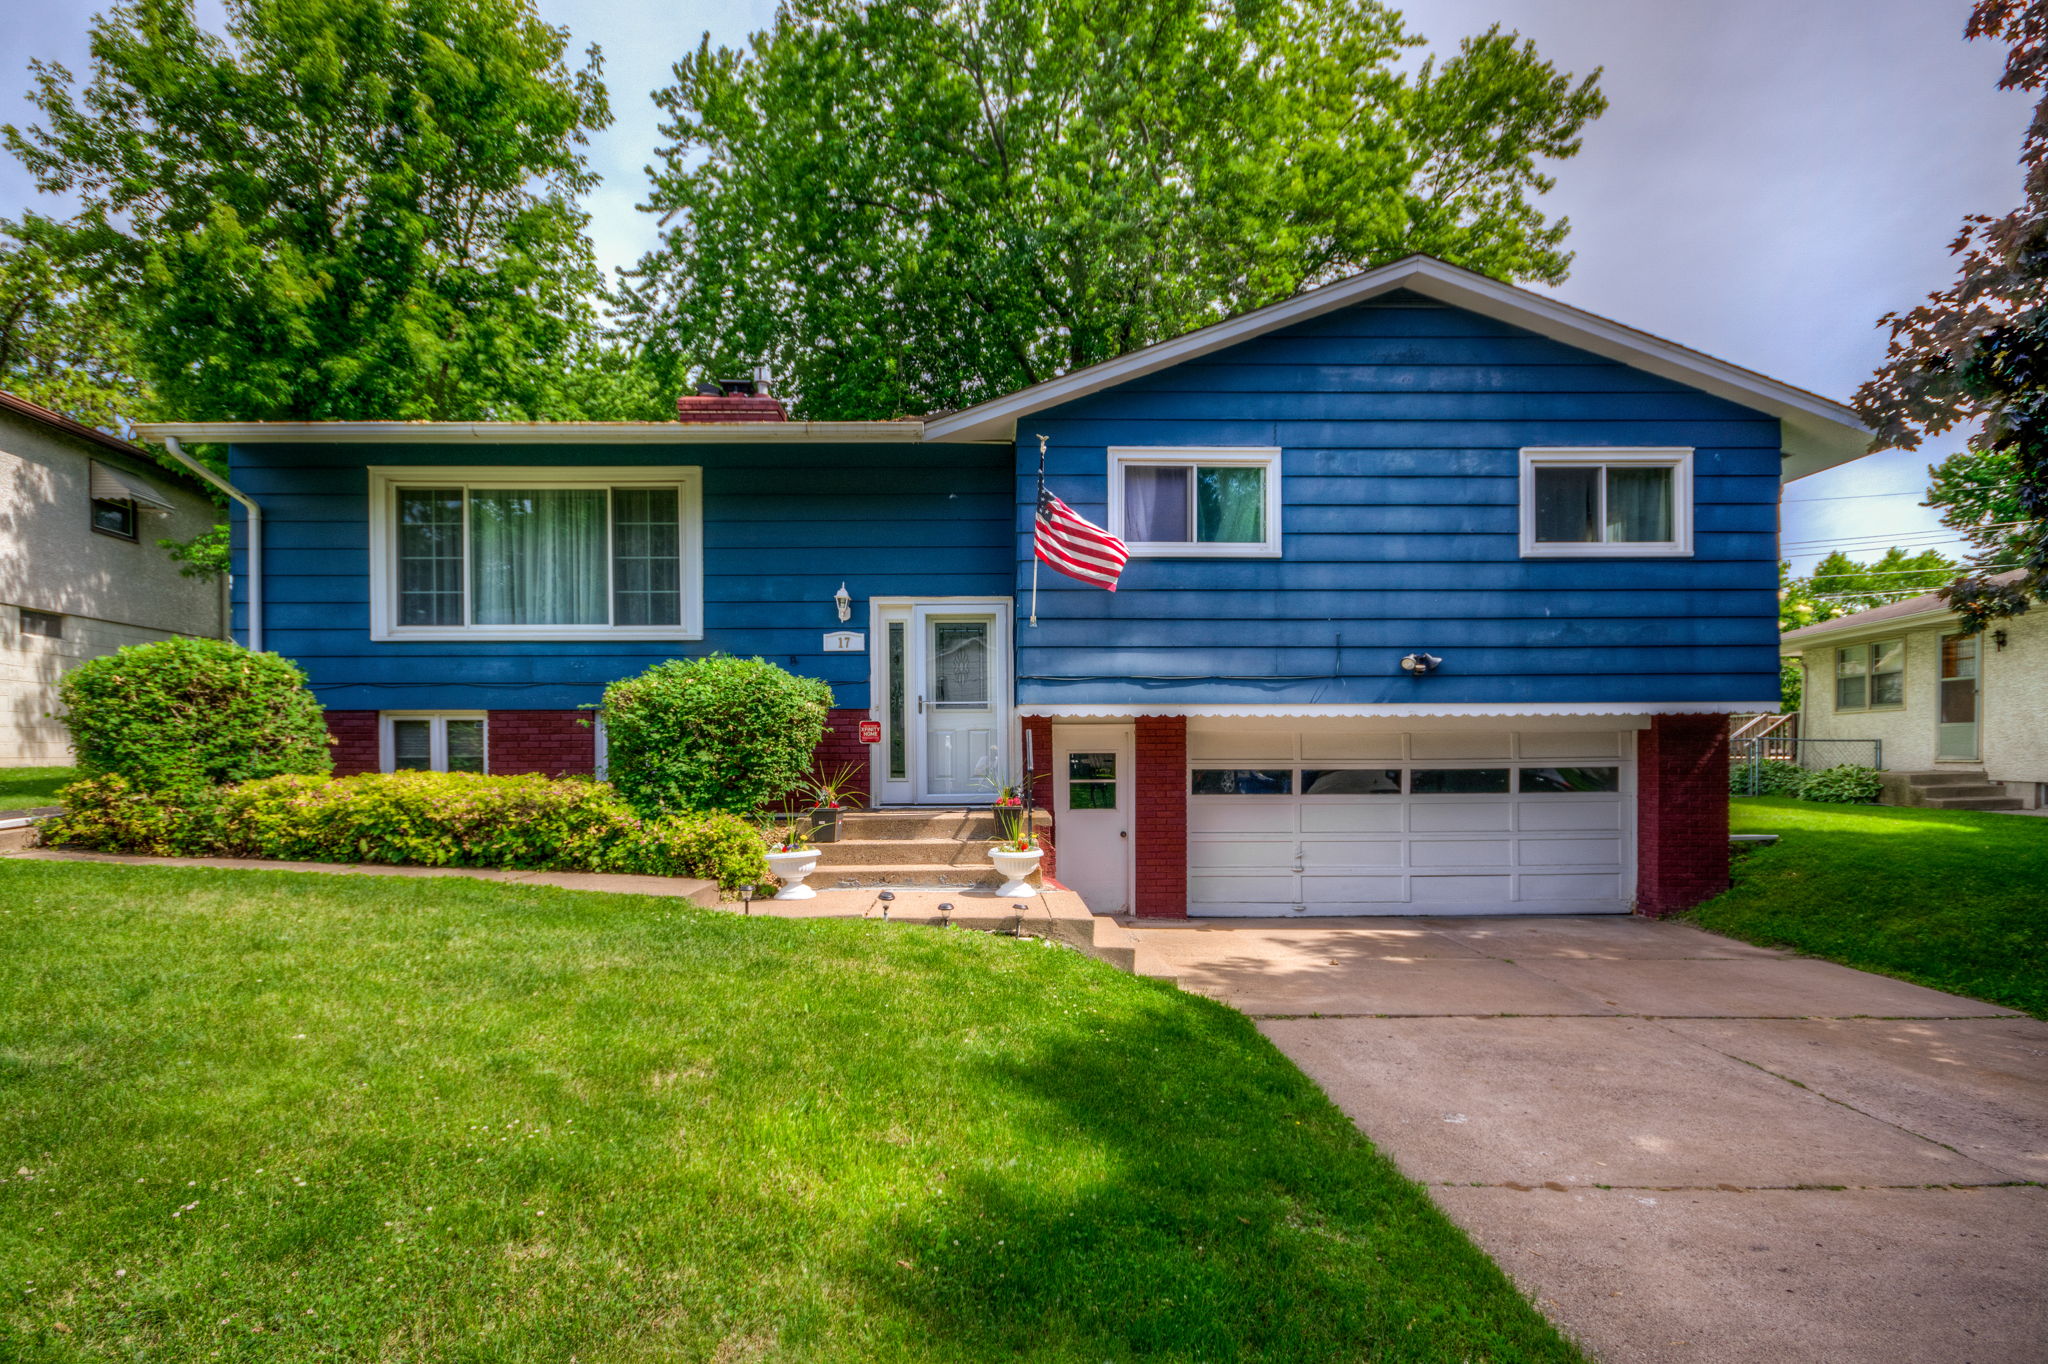  17 Imperial Drive E, West St. Paul, MN 55118, US